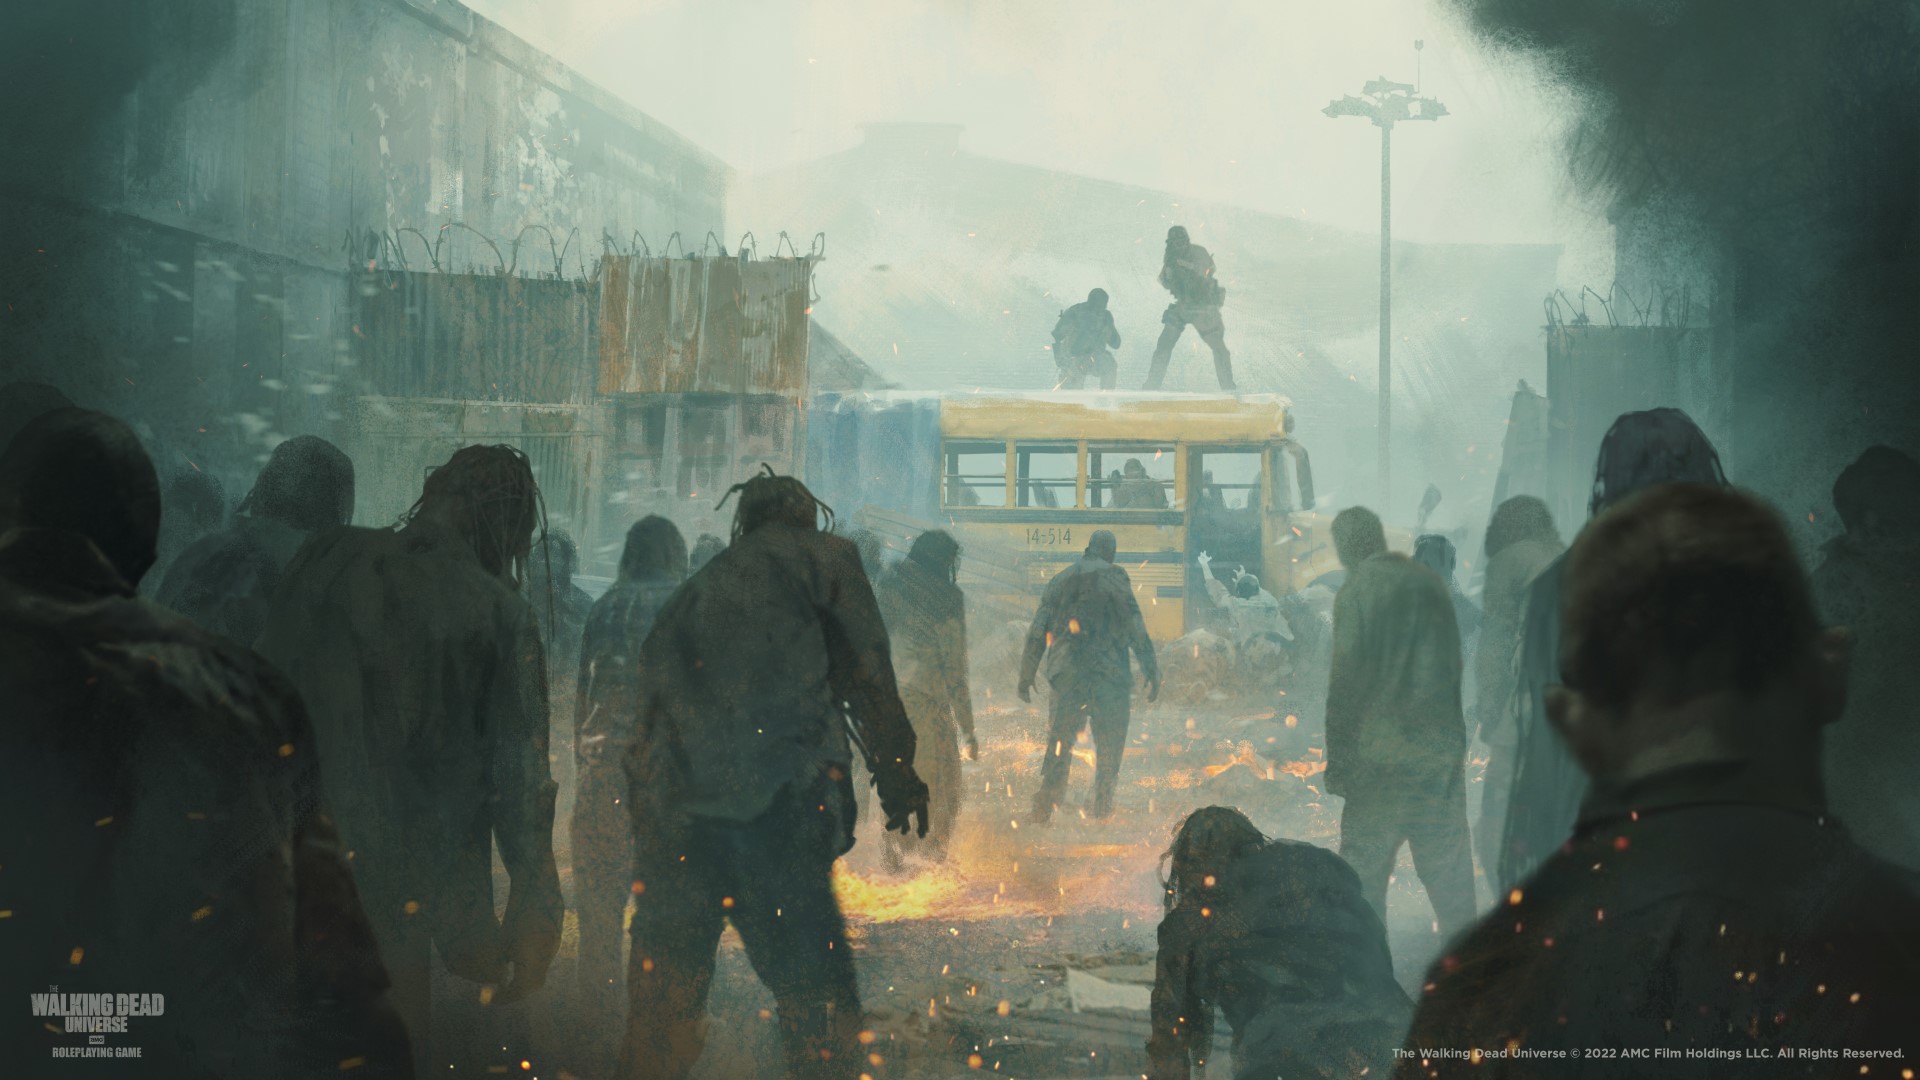 Free League Publishing art for The Walking Dead RPG, showing a horde of Walkers approaching survivors on a schoolbus